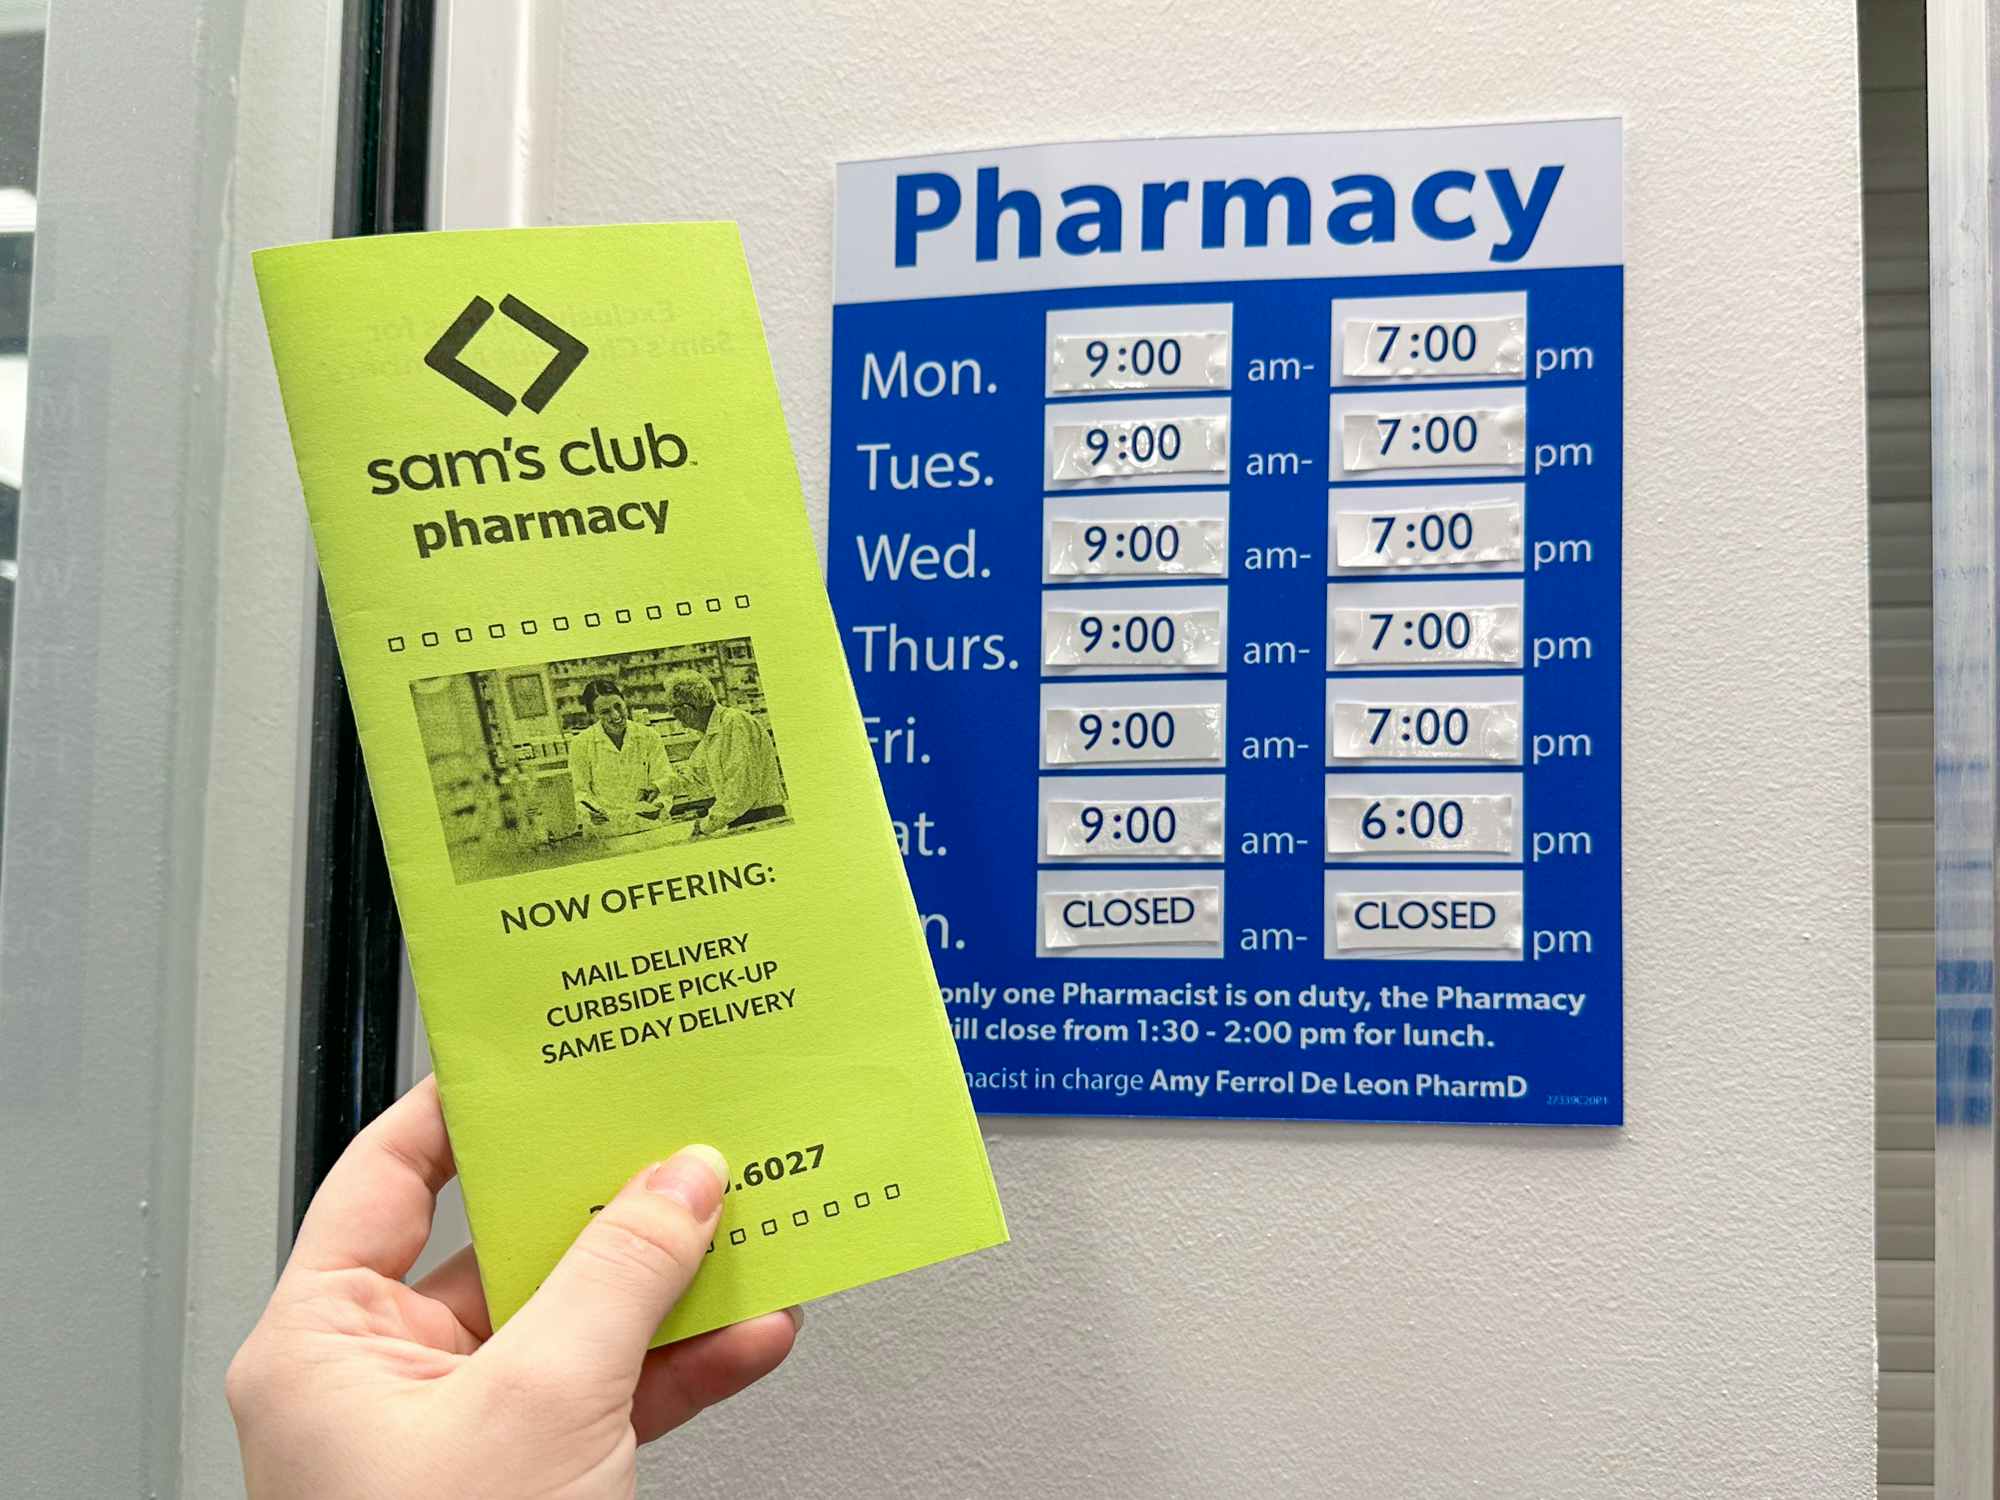 Someone holding a Sam's Club Pharmacy pamphlet in front of the Pharmacy hours